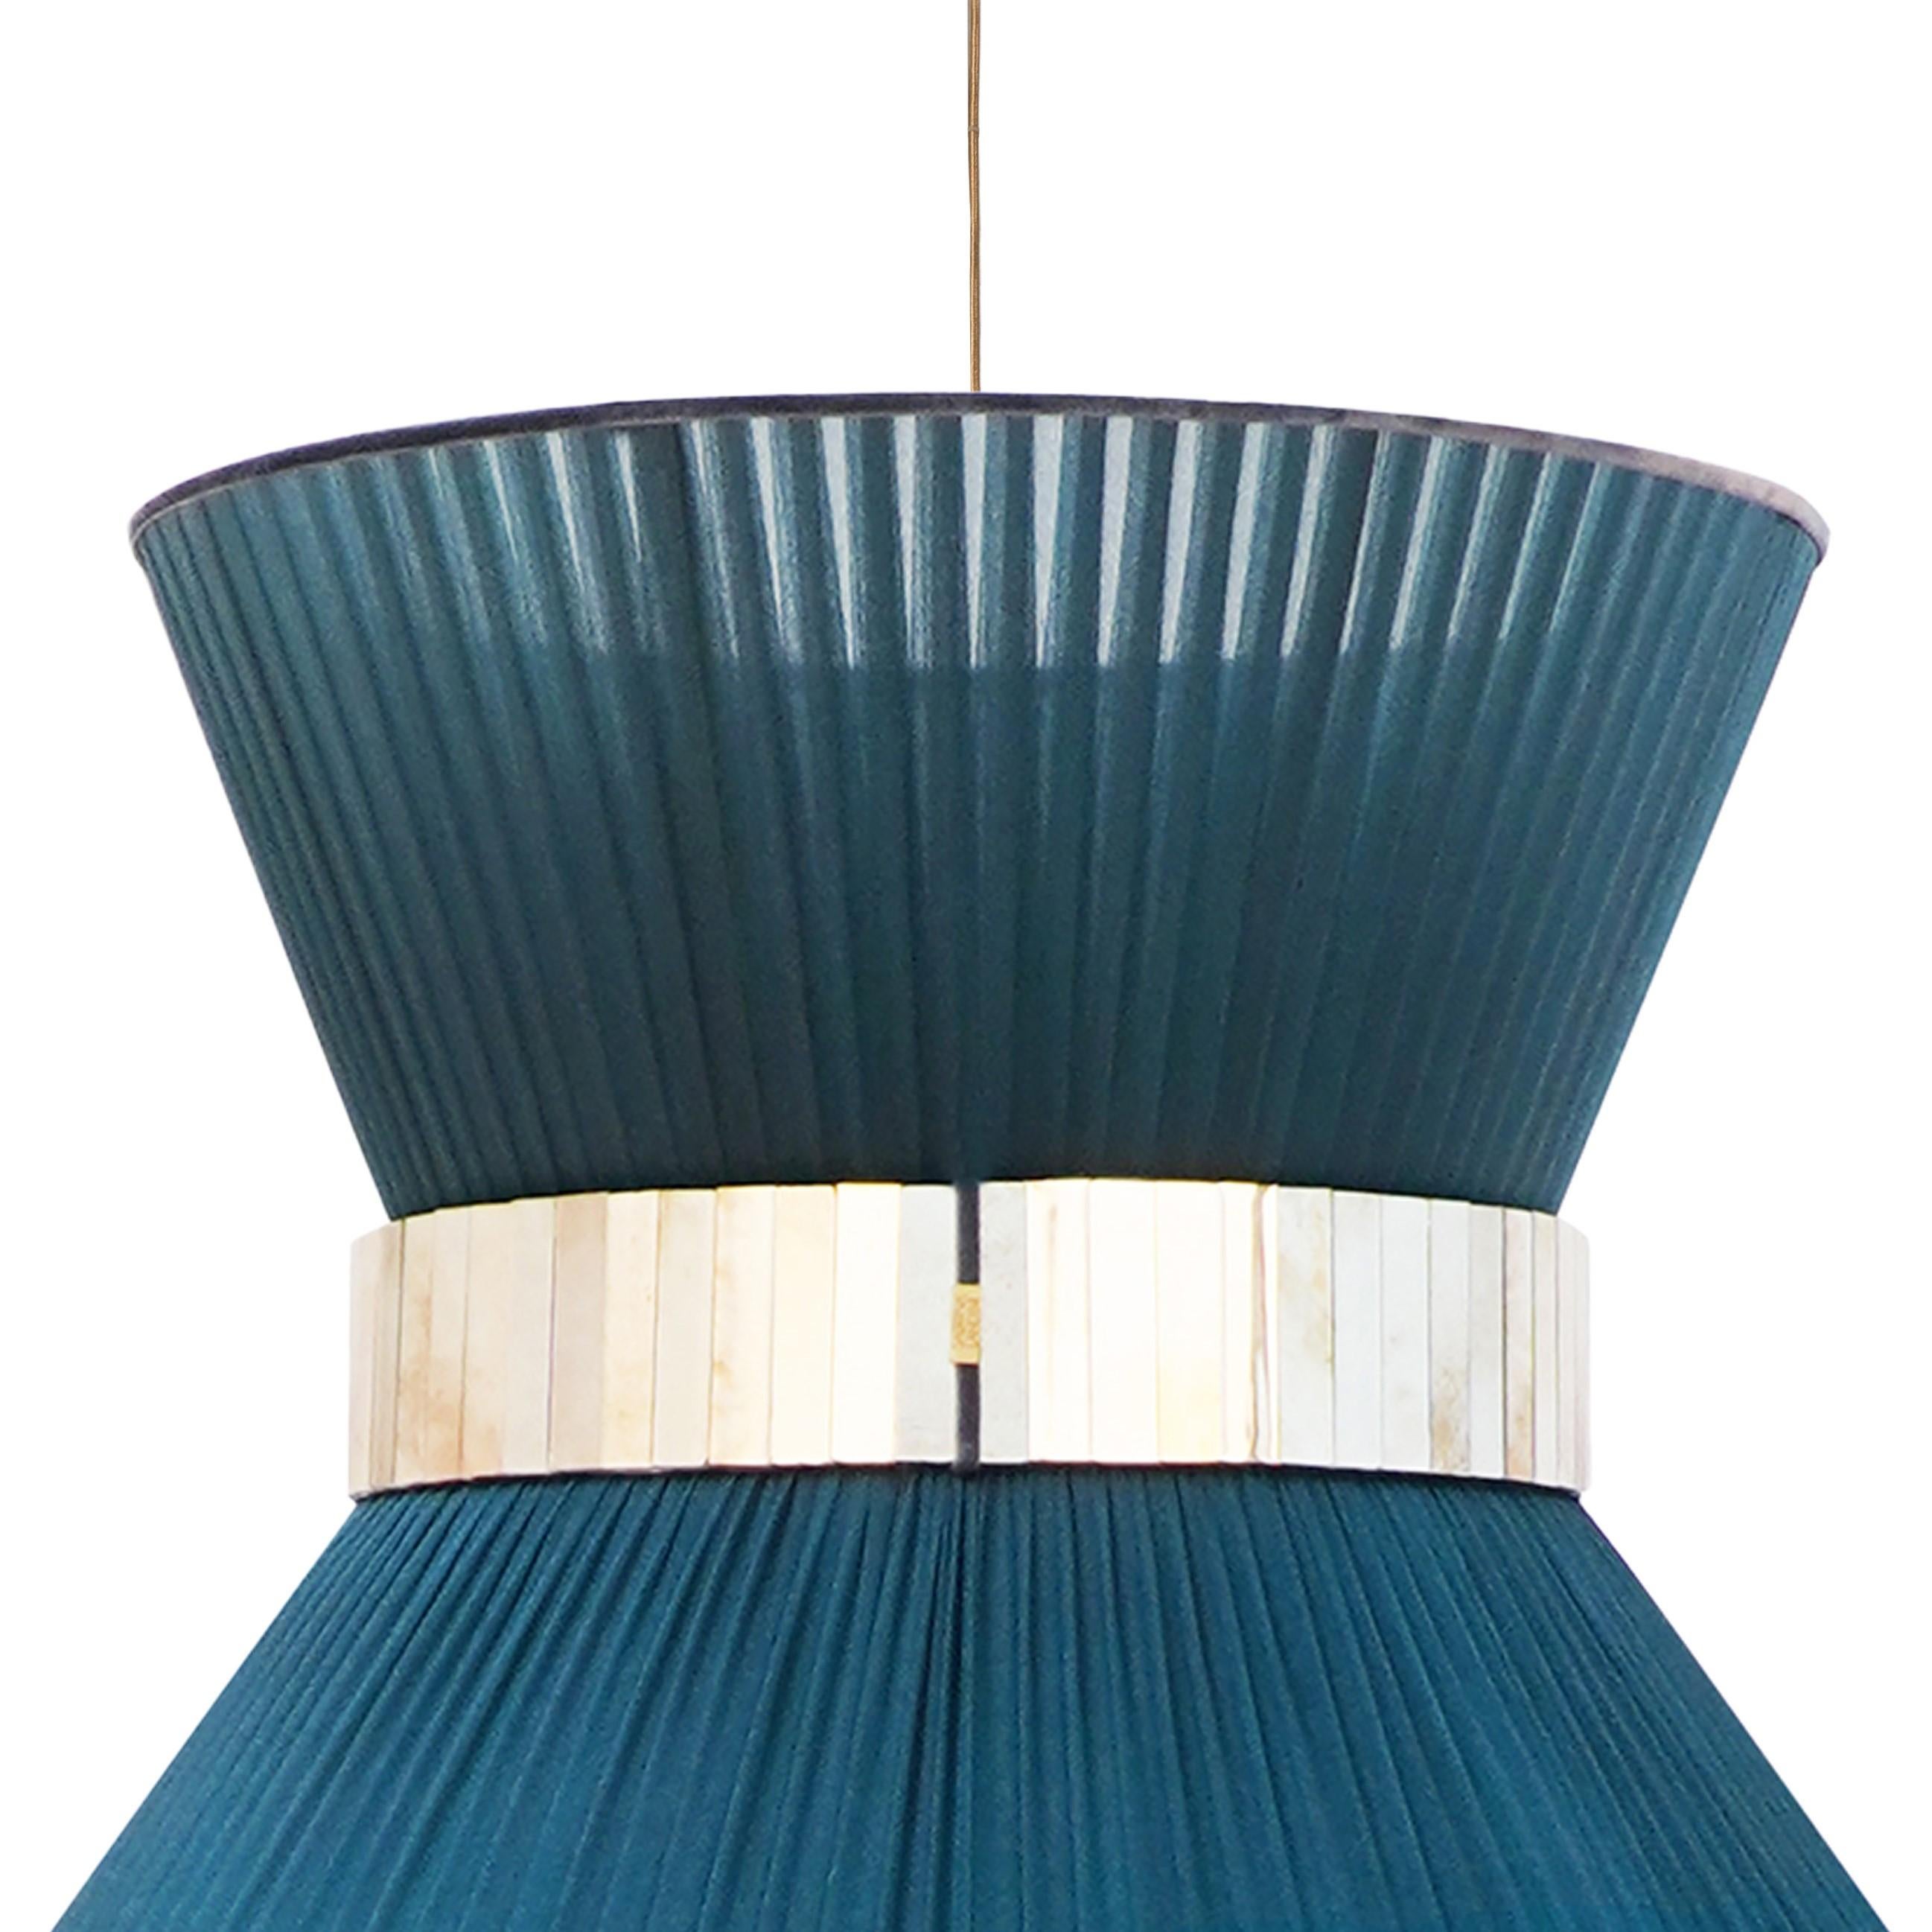 TIFFANY the iconic lamp!

Sabrina Landini DNA comes into life in all our creations, a touch of originality to your home decor. Sabrina Landini selects the most beautiful materials and assemble them to create home decorative items recognized